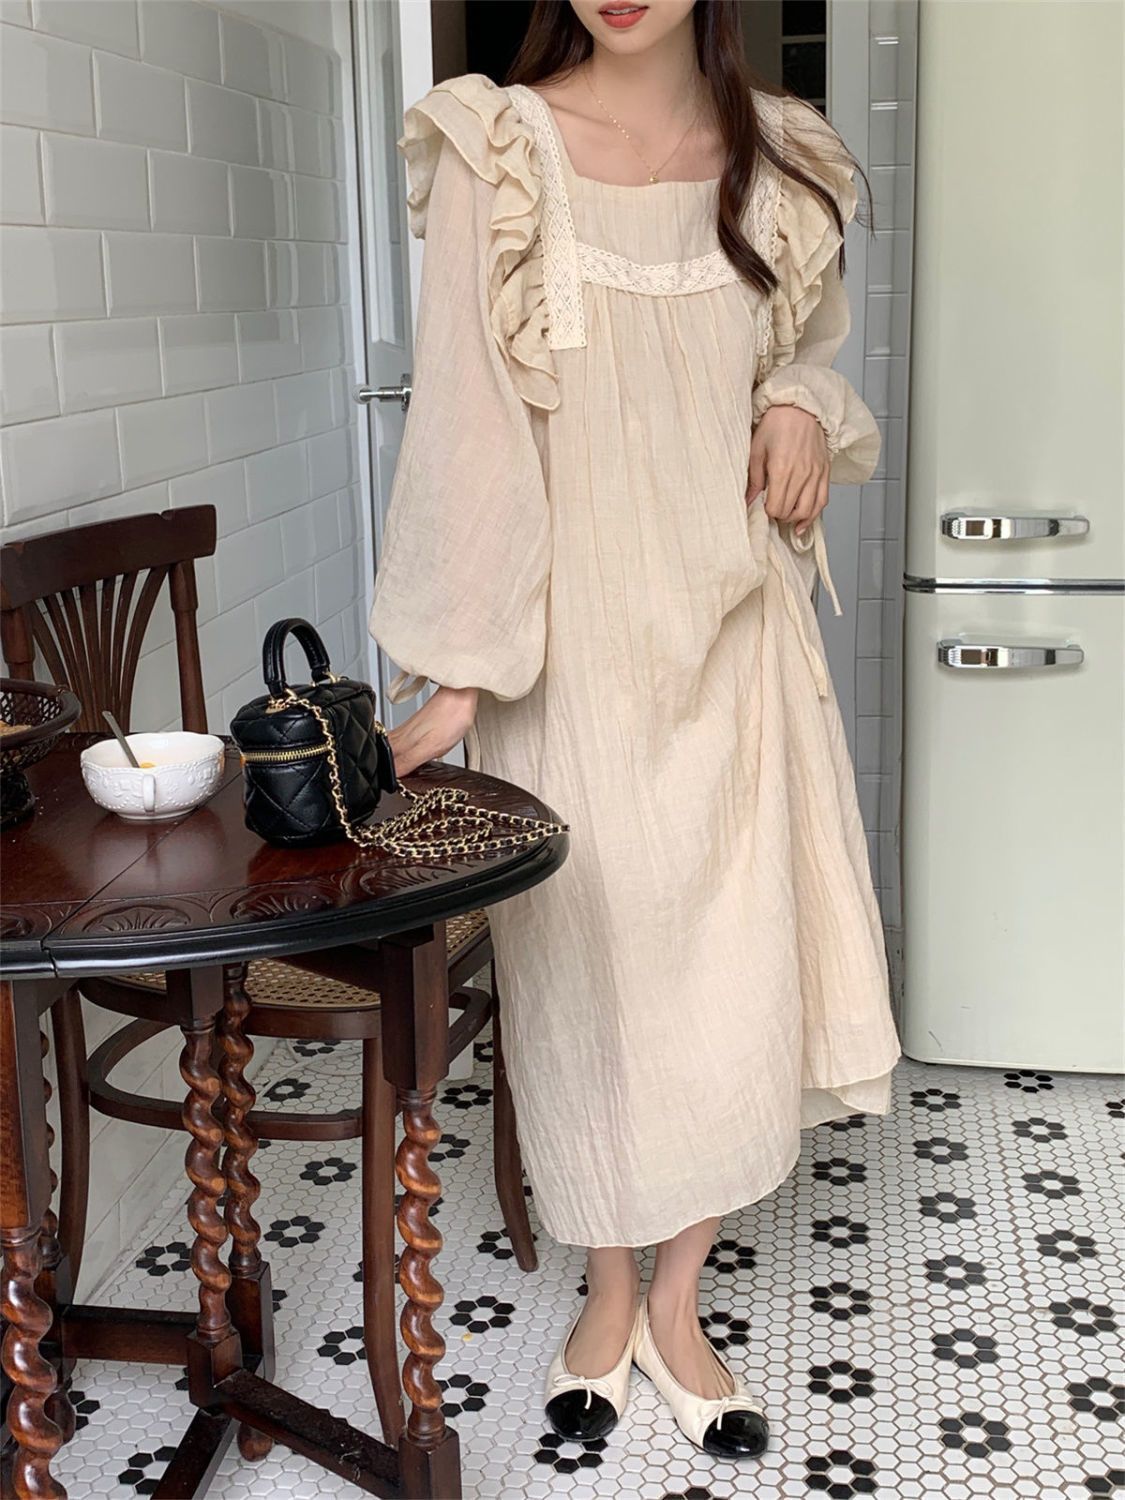 Korean style nightdress women's autumn and winter pure cotton long-sleeved square collar court style pajamas ins style hot girl super long nightdress can be worn outside